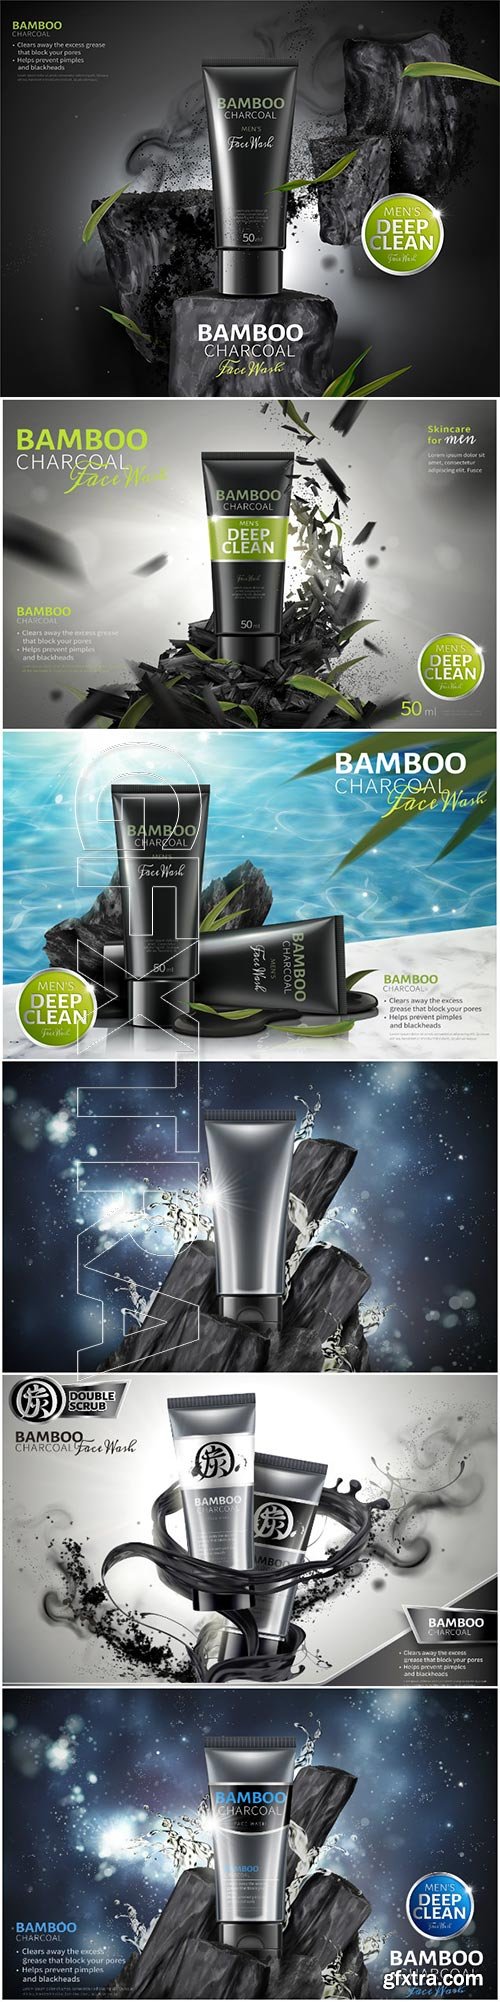 Bamboo charcoal face wash vector design template